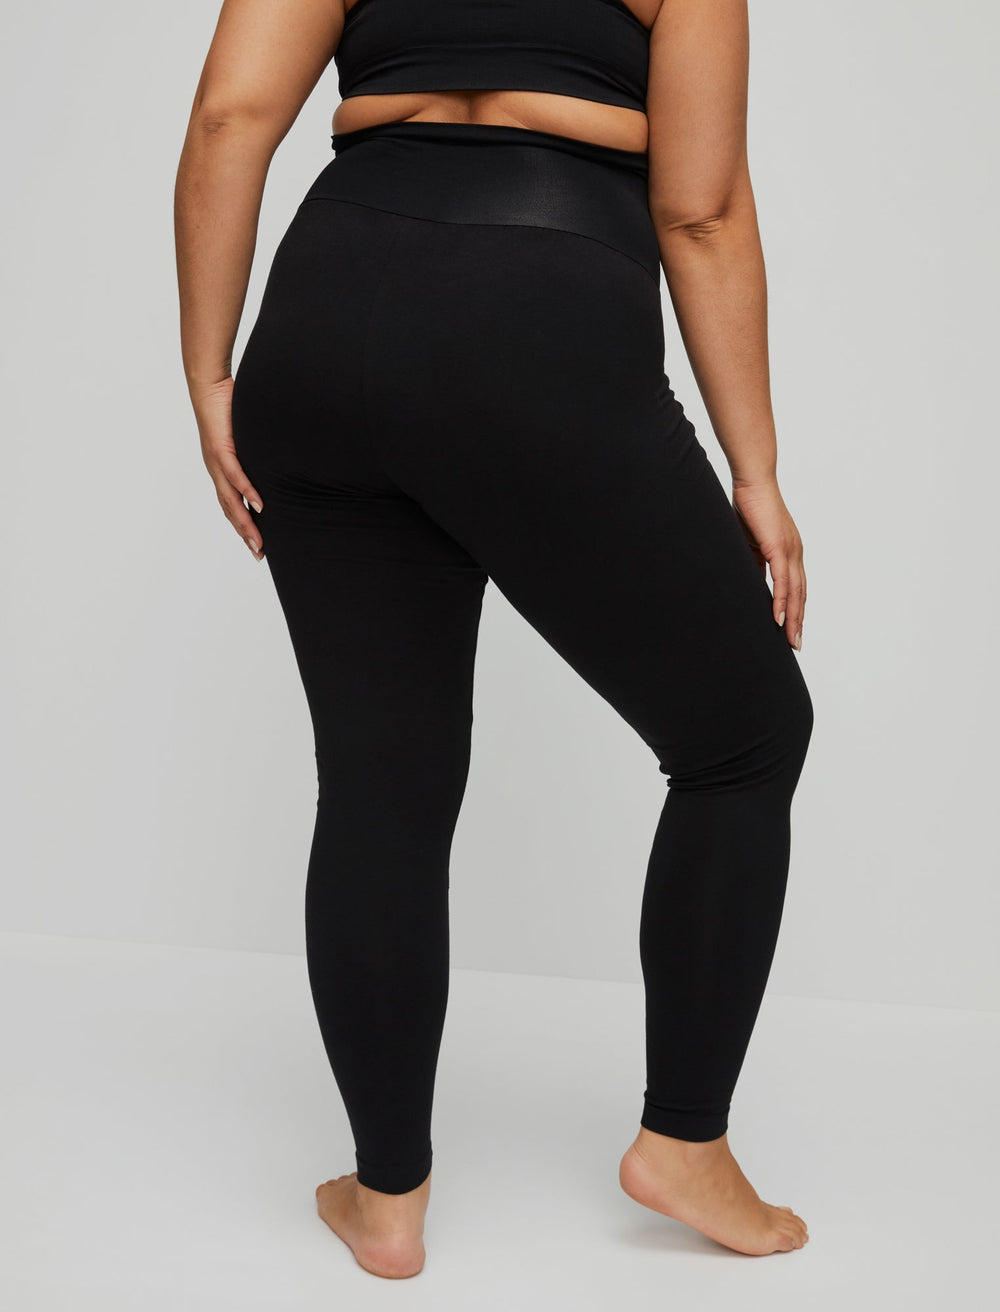 Women's Plus Size High Waist Stretchy Knot Front Solid Leggings Workout Gym  Yoga Pants 1XL(14) 